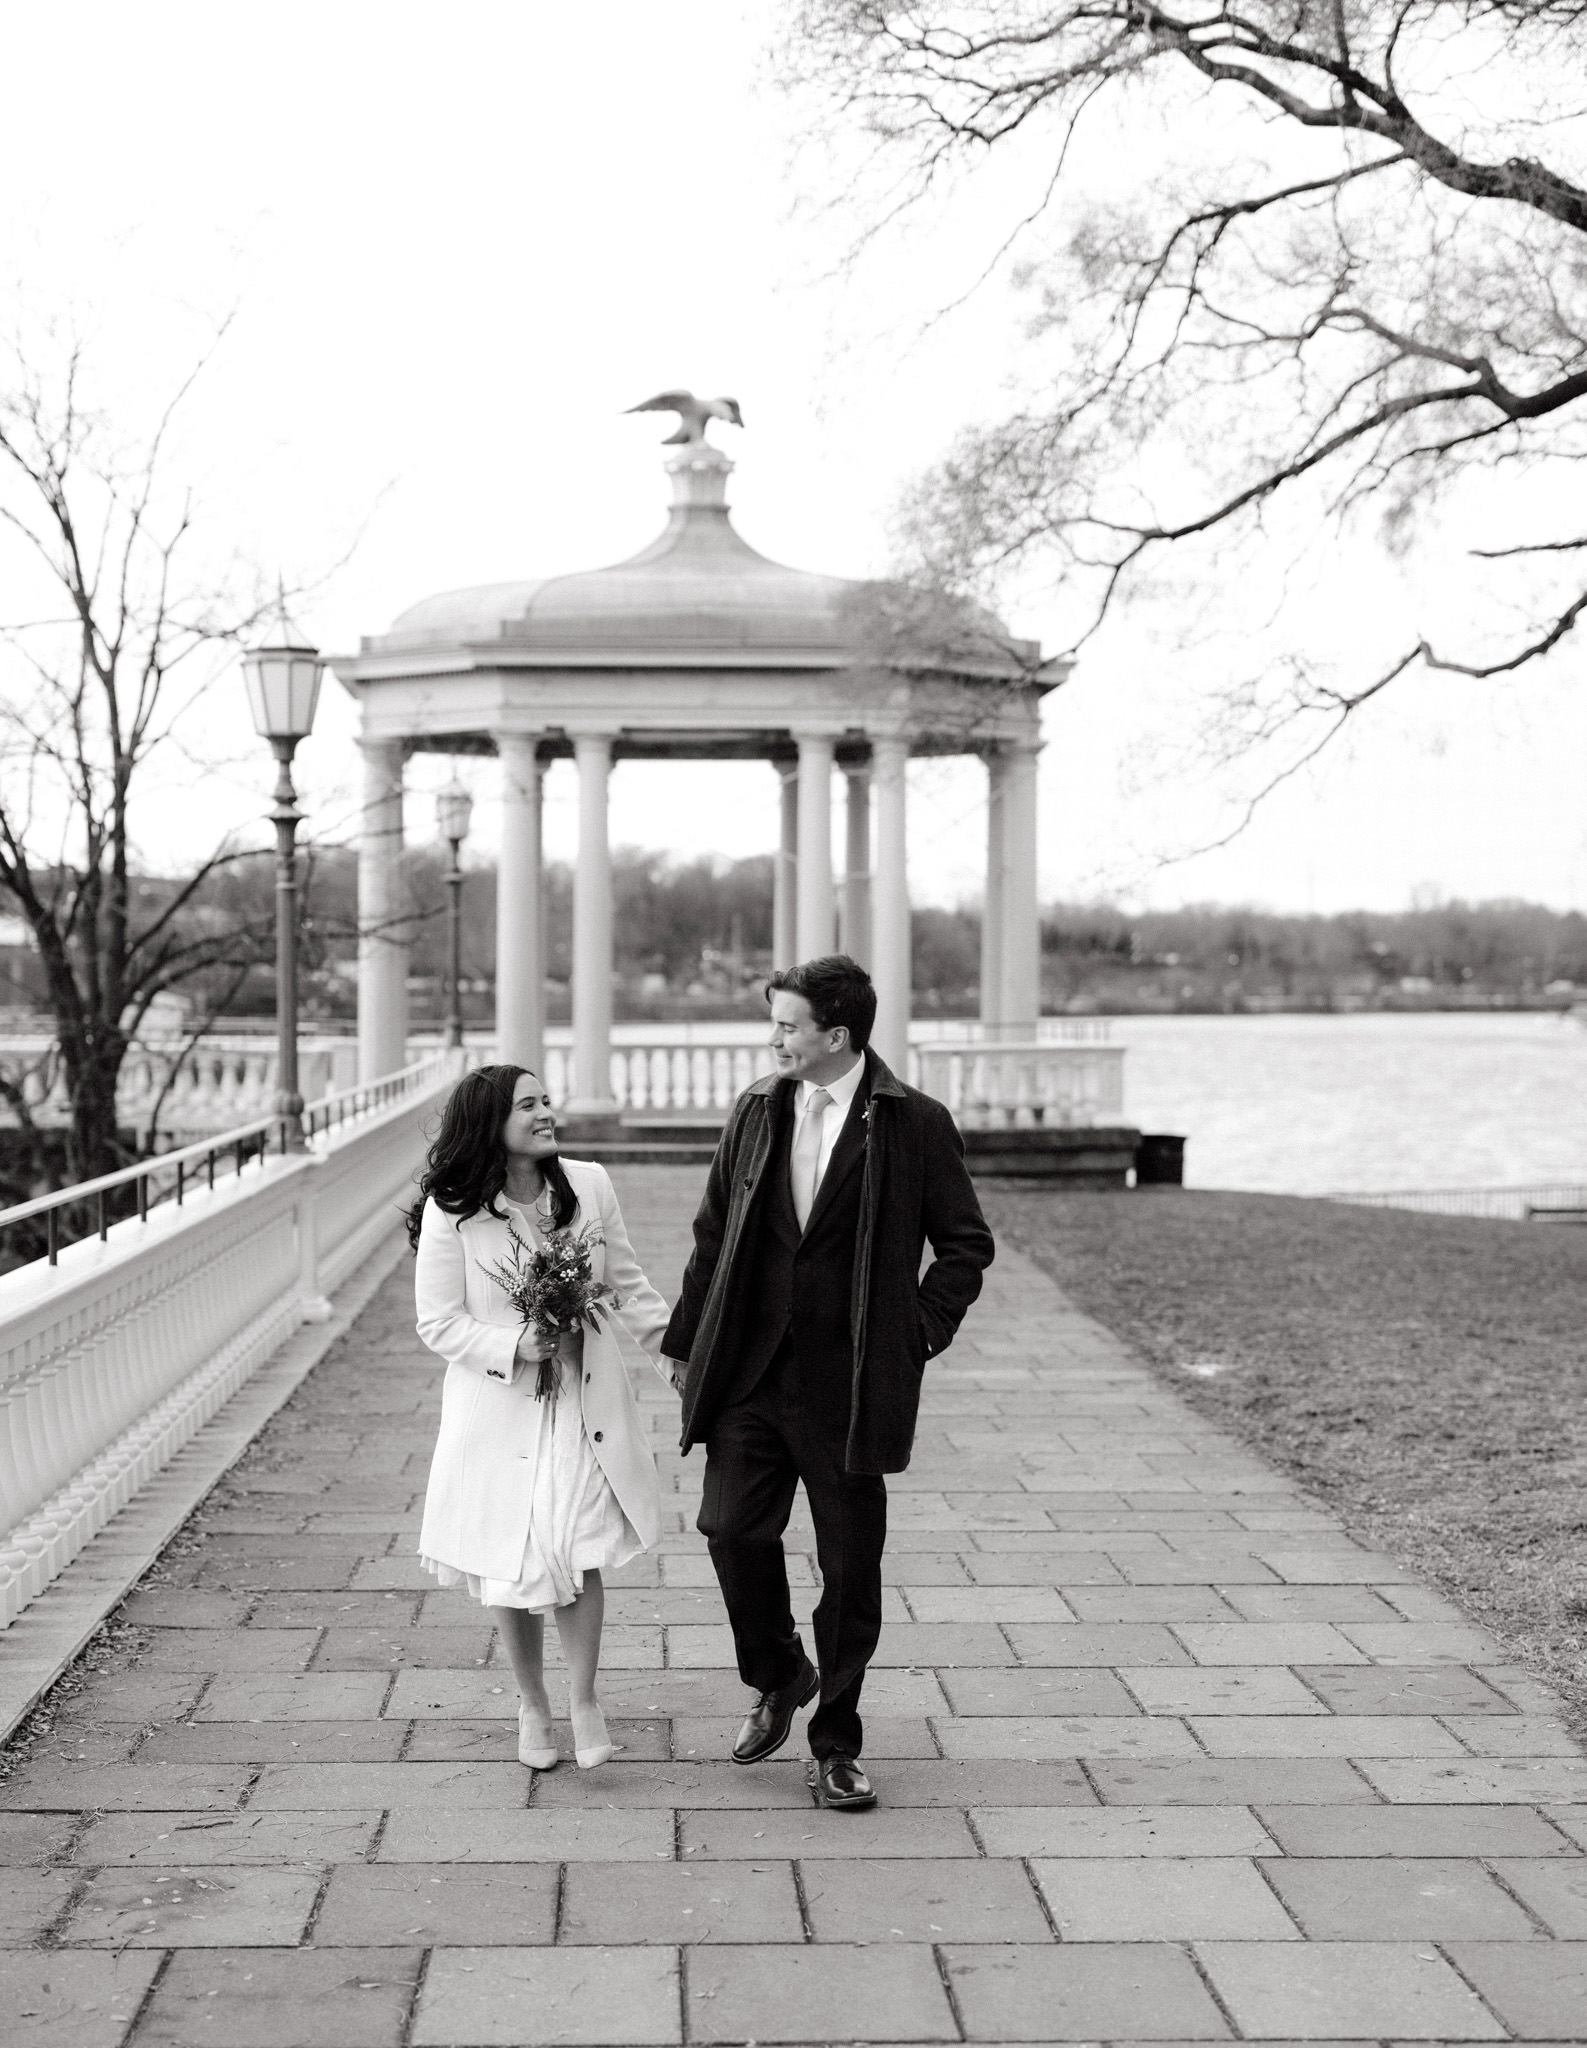 Editorial image of the newly-weds walking on the pathway after the wedding ceremony. Image by Jenny Fu Studio